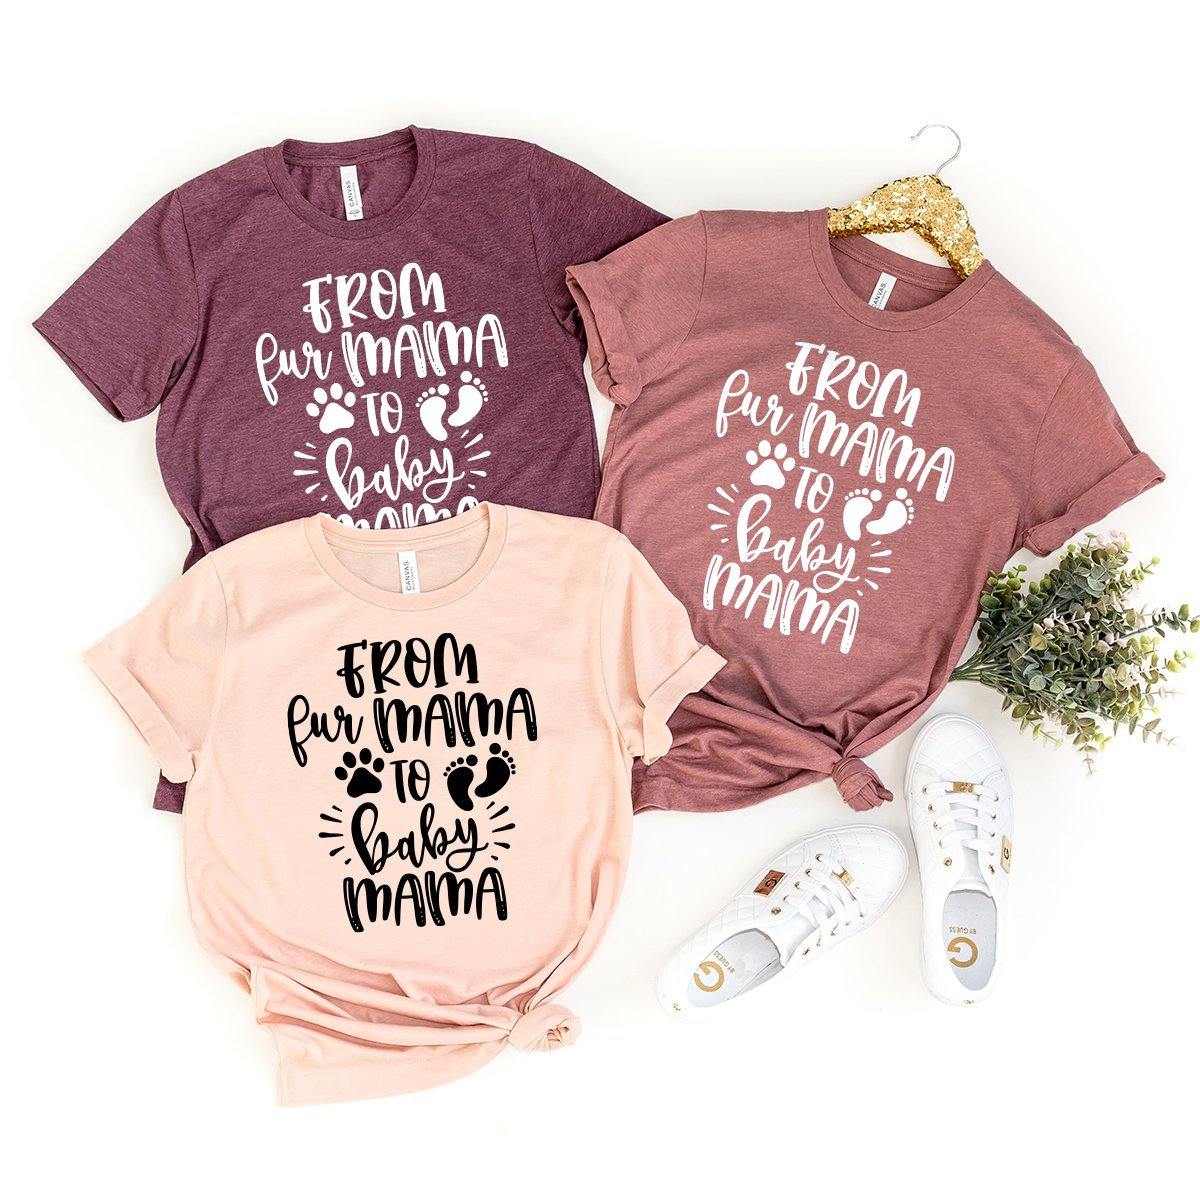 From Fur Mama To Baby Mama Shirt, Baby Announcement Shirt, New Mom Gift, Fur Mom And Baby Mom Shirt, New Mama Gift, Pregnancy T-Shirt - Fastdeliverytees.com